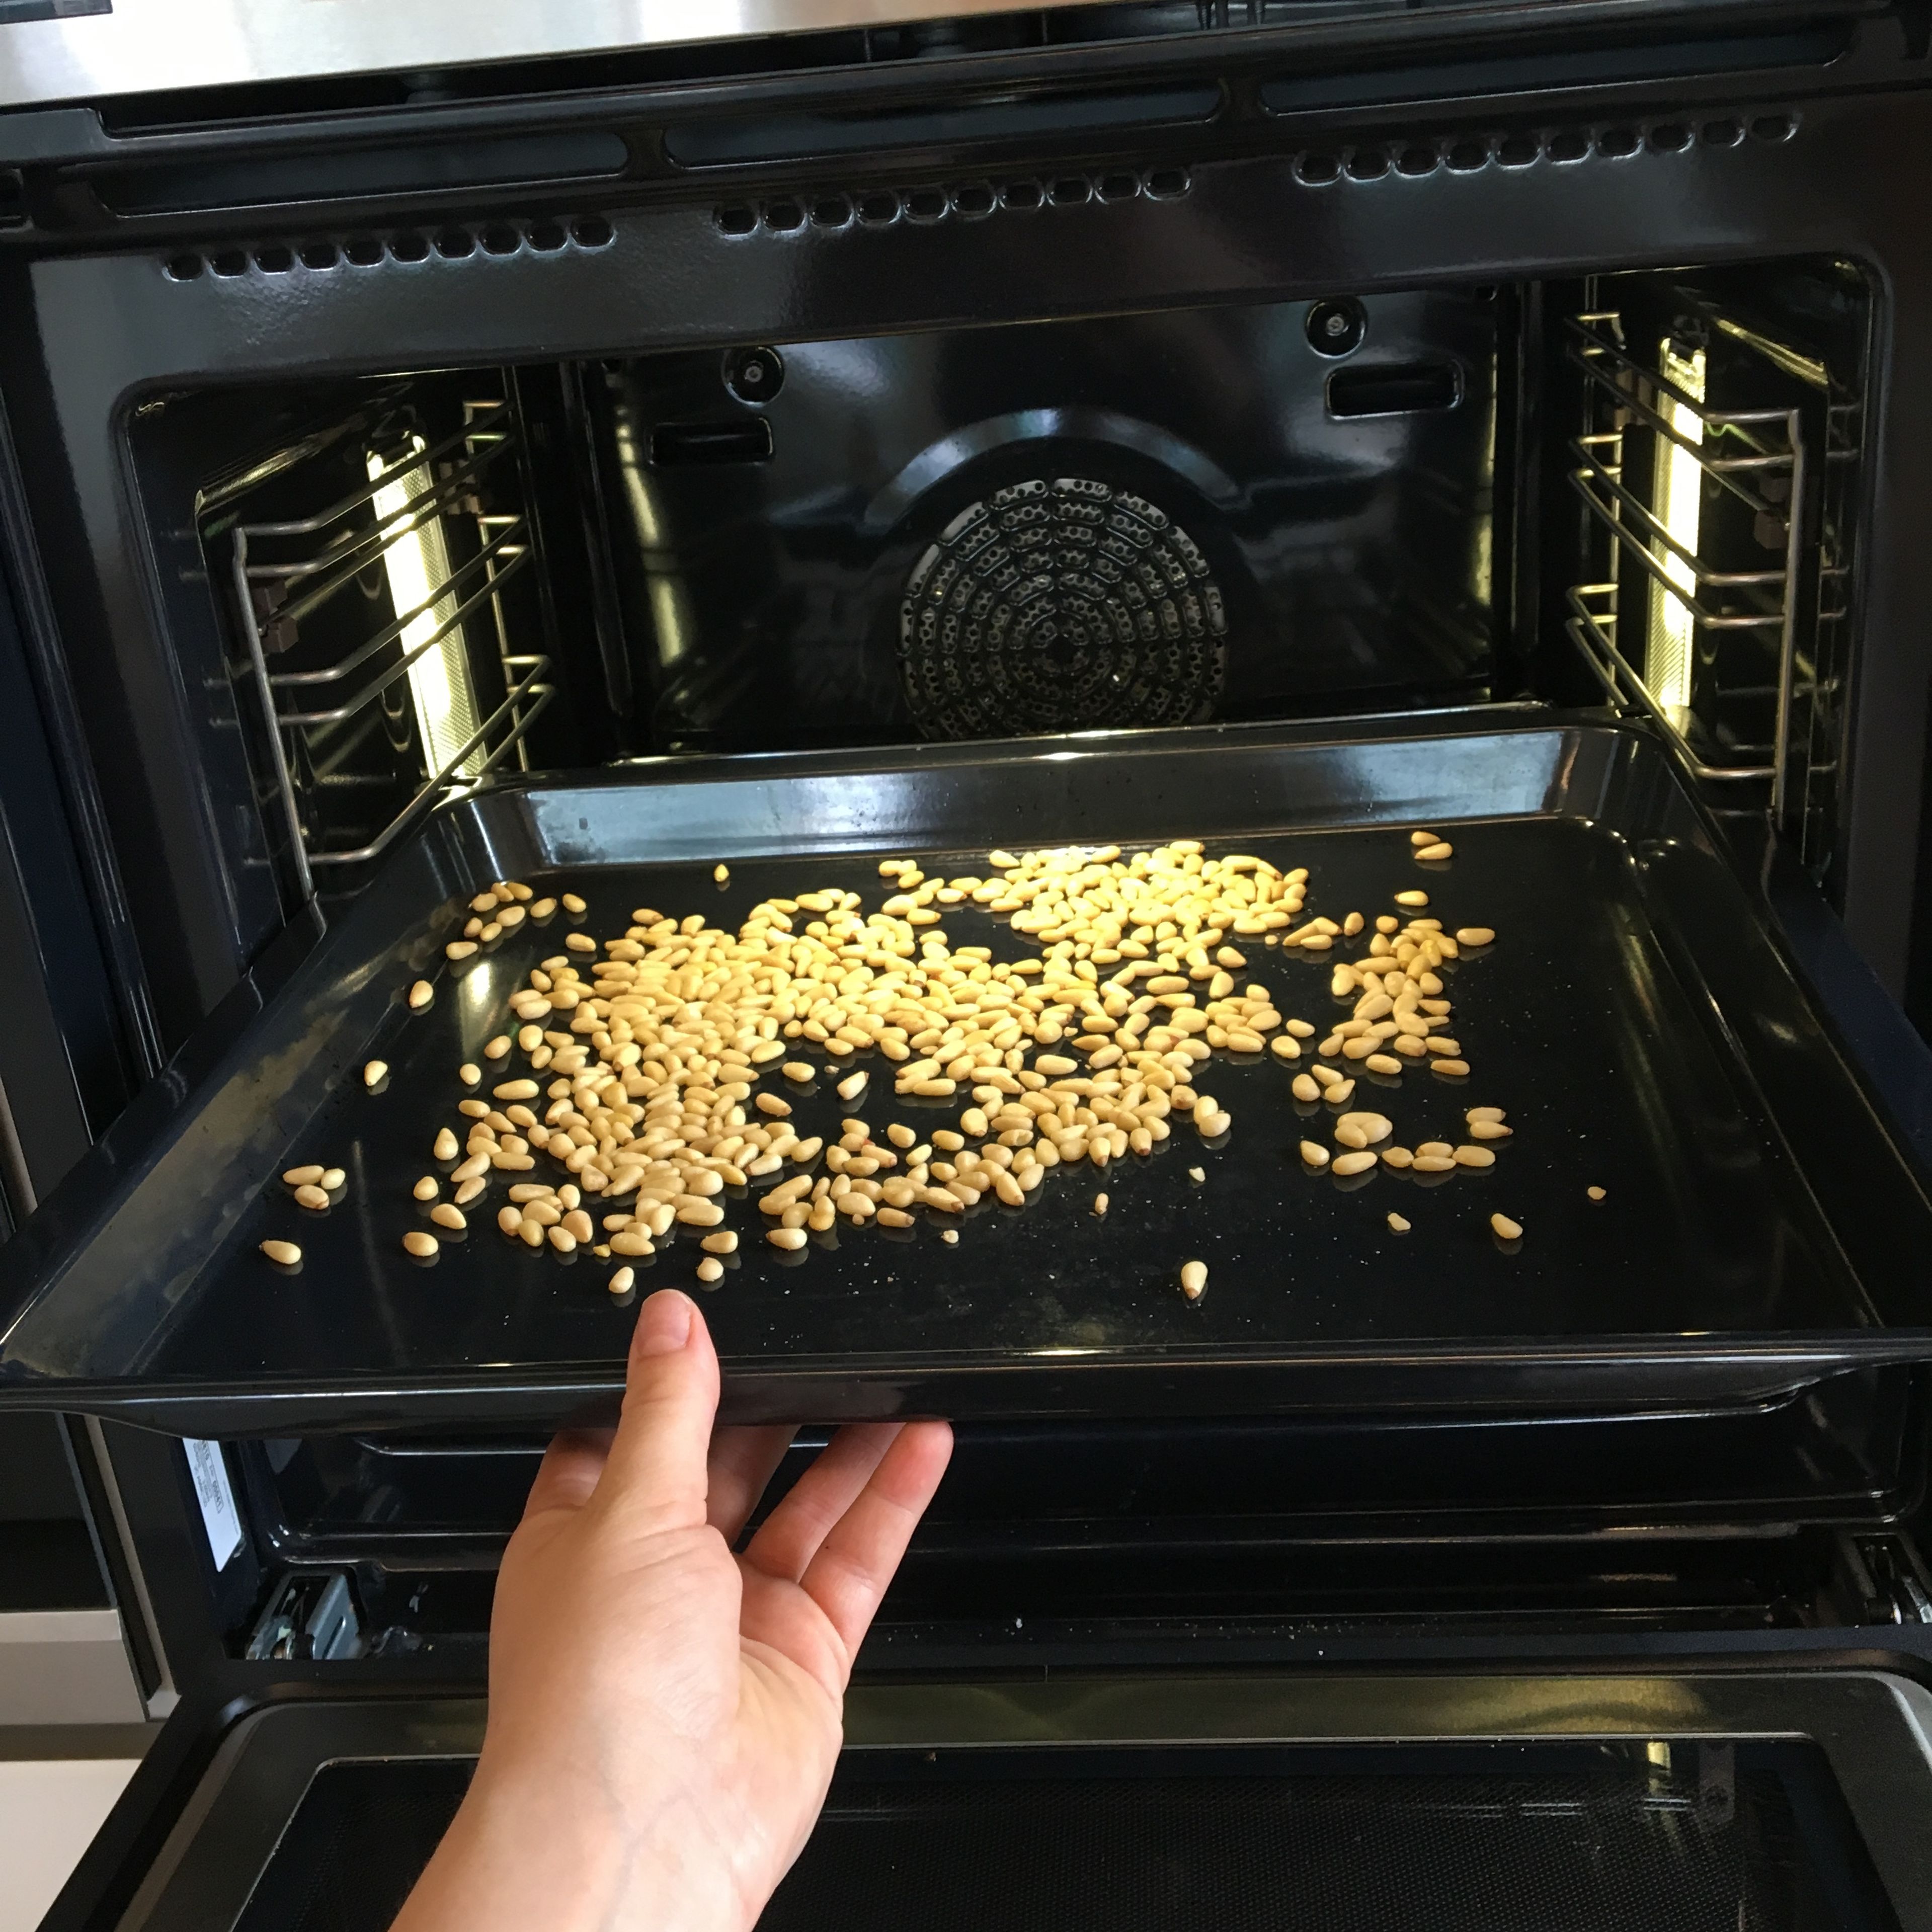 Toast pine nuts in a preheated oven at 160°C/320°F for 10 min.